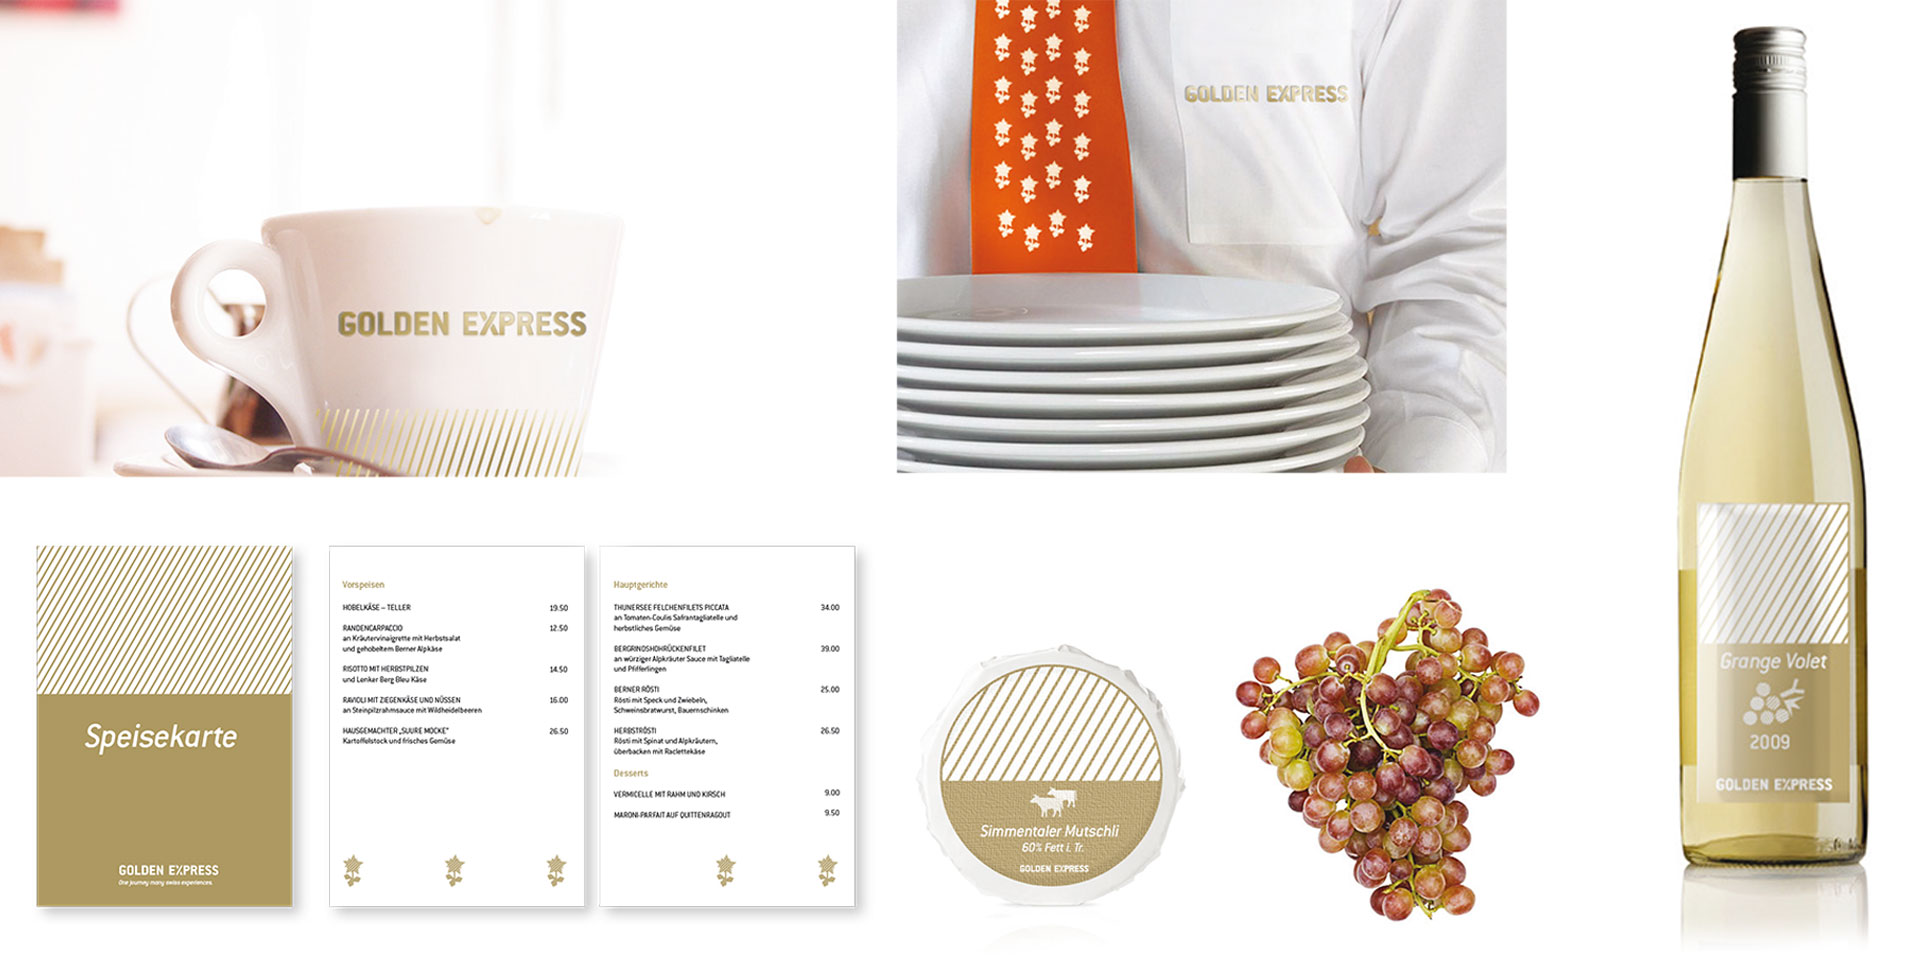 03 milani design consulting agency Goldenpass golden express bls corporate fashion textile transportation wear